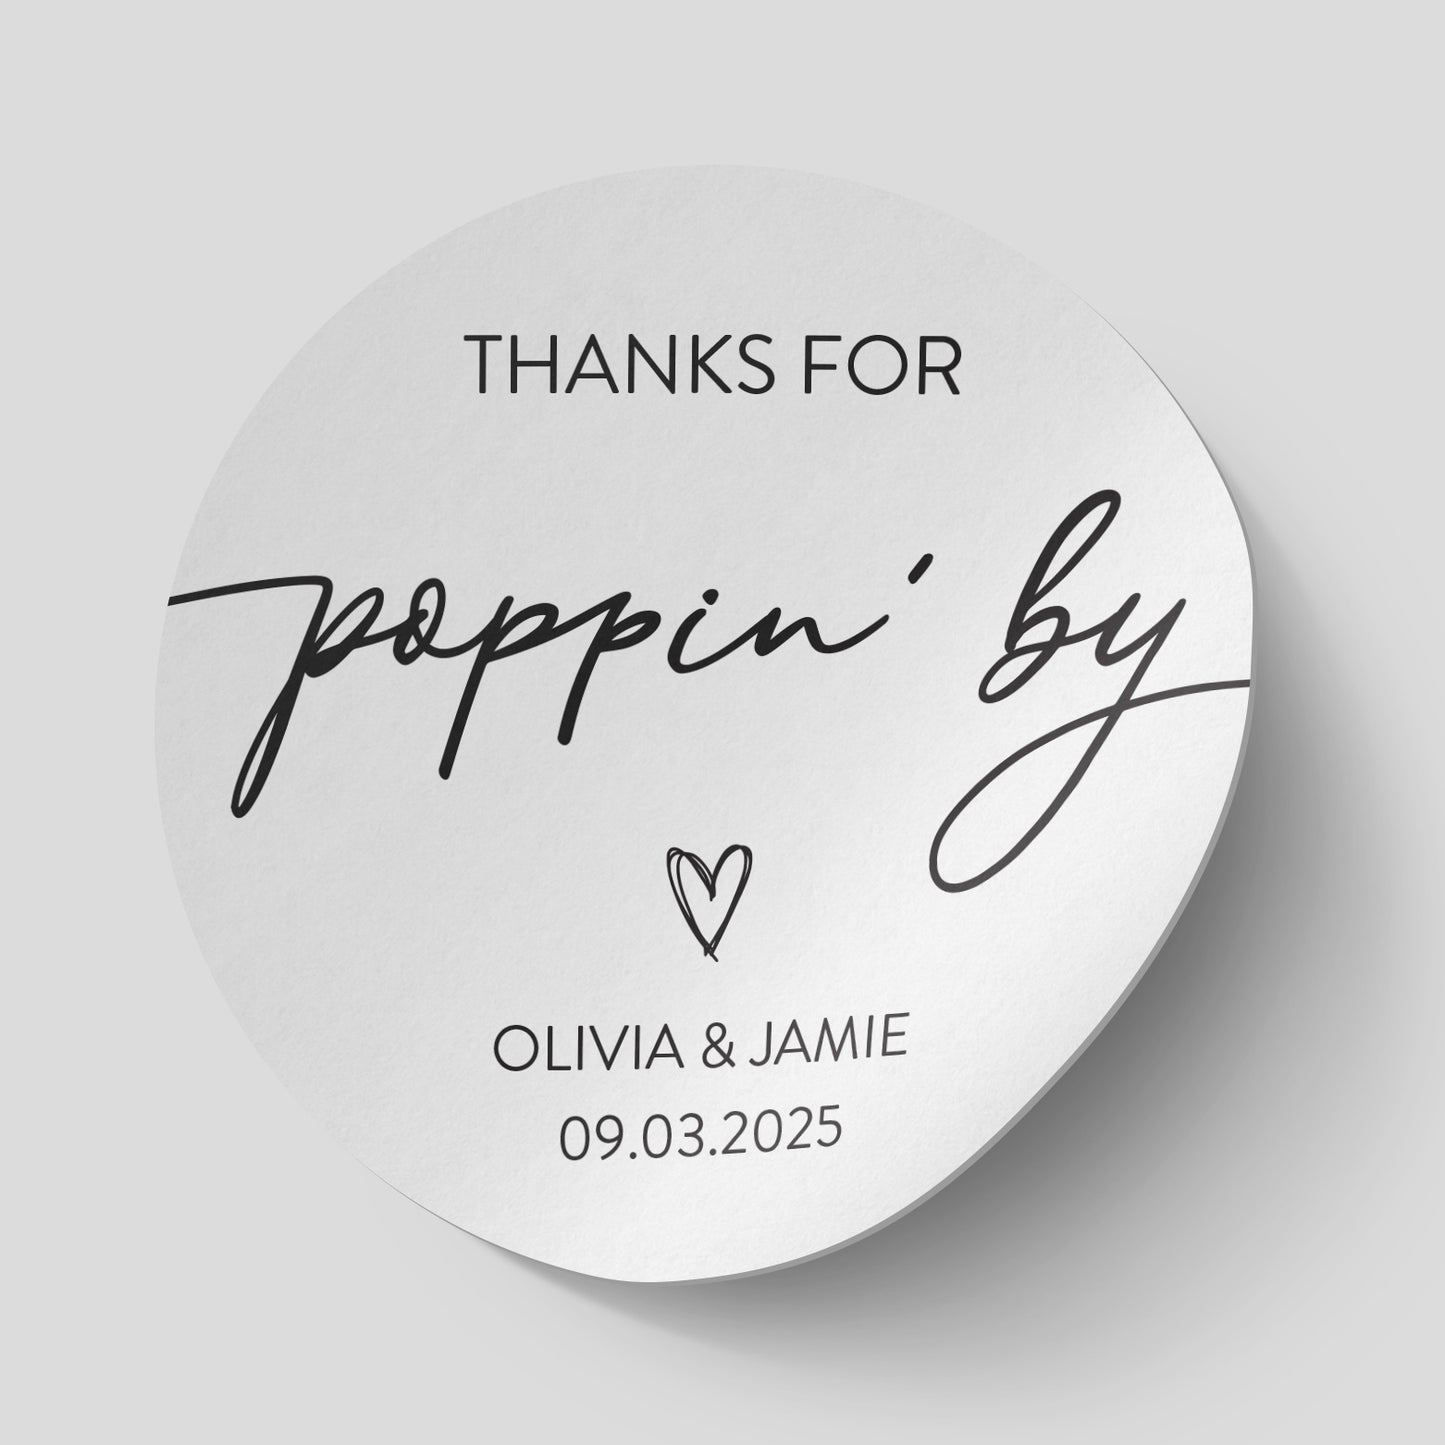 Personalised Thanks for Poppin' By Stickers